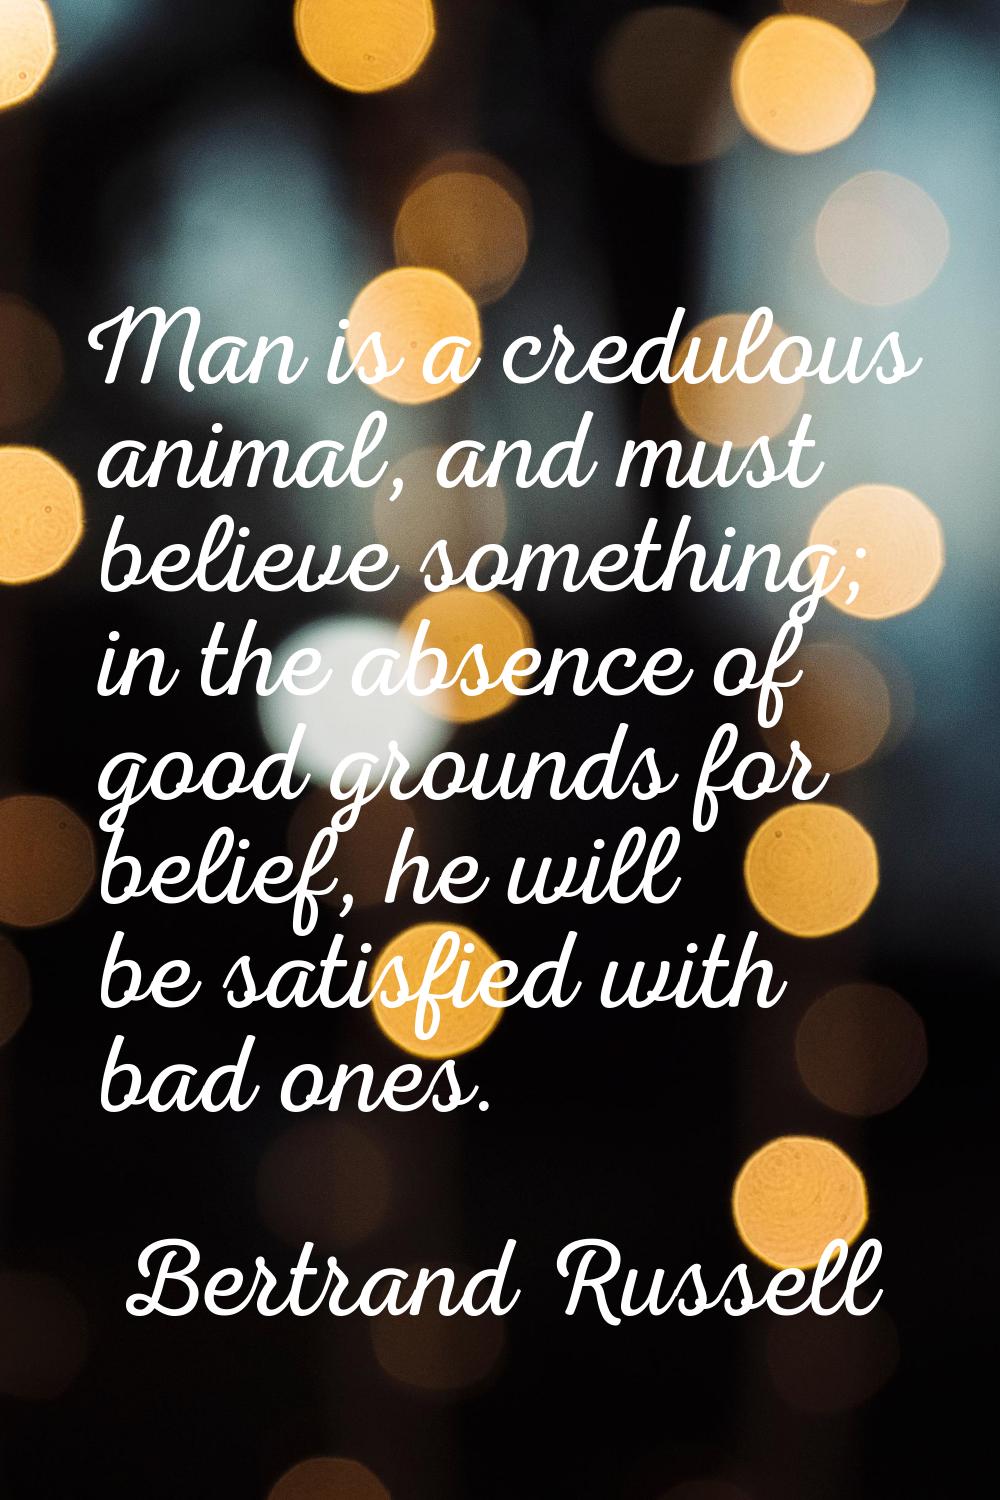 Man is a credulous animal, and must believe something; in the absence of good grounds for belief, h